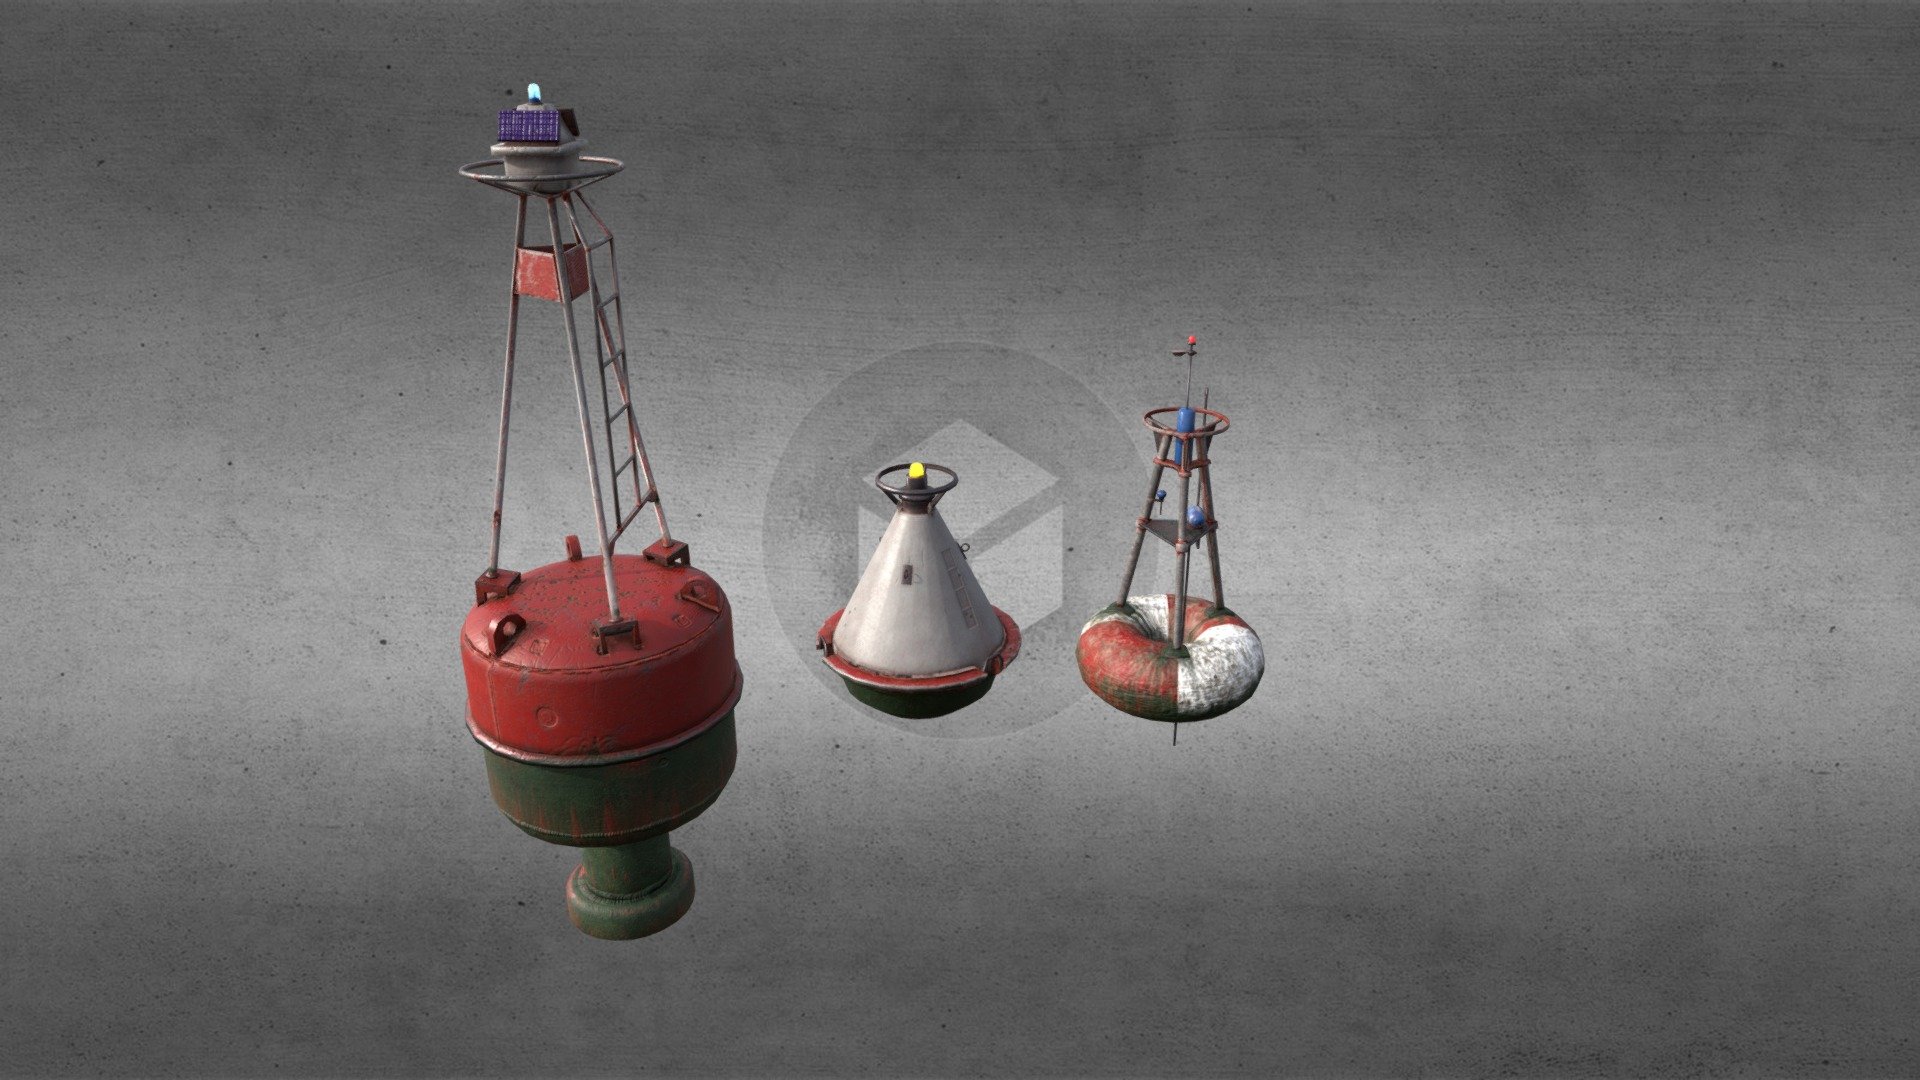 a set of three models of marine buoys,(navigation, metteorological and radio communicattion) sharing common texture. Was created as Game asset for unreal engine game project 3d model